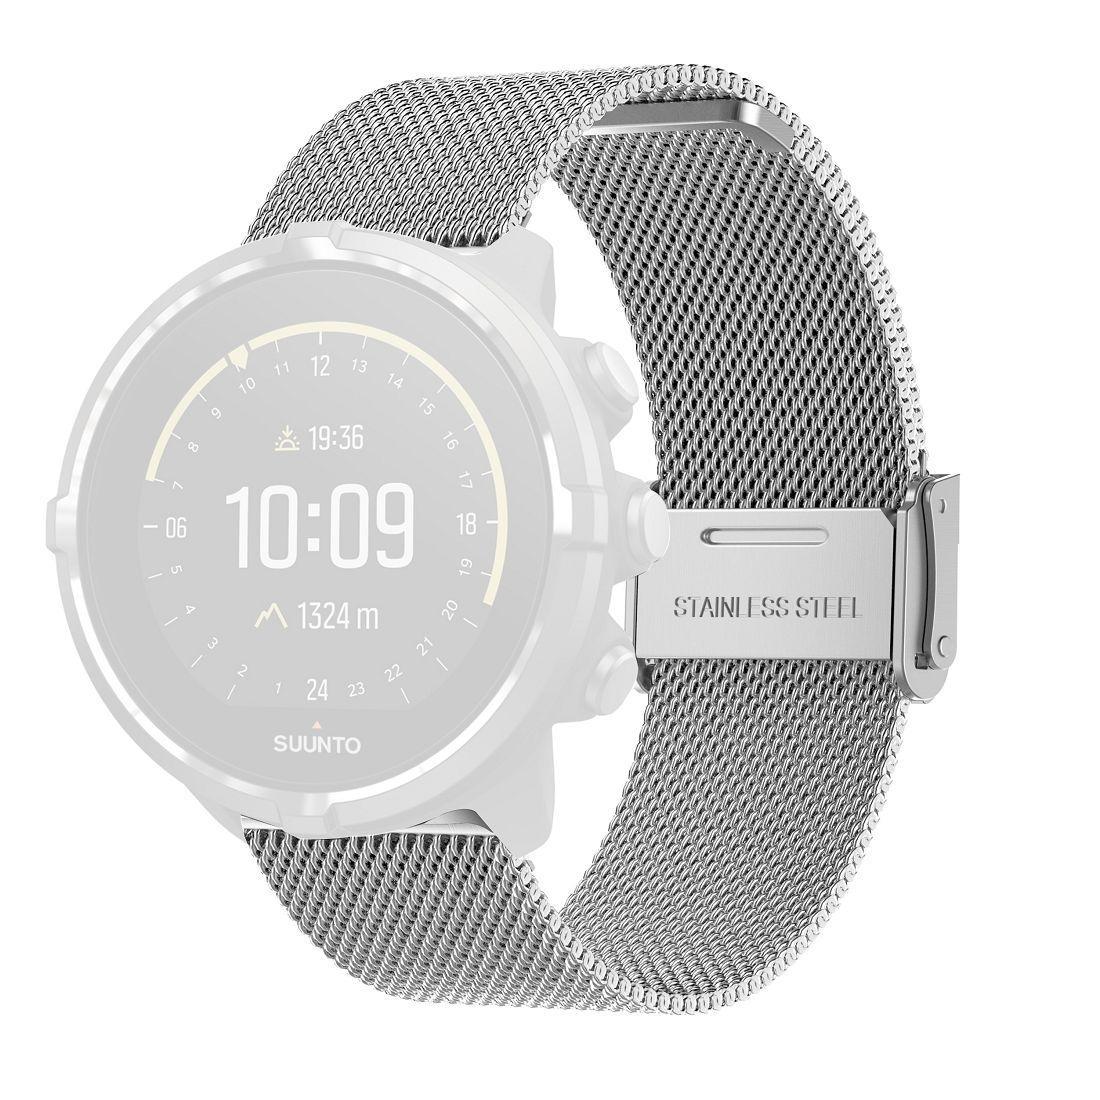 For Suunto 9 Milanese Nice Buckle Replacement Wrist Strap Watchband(Silver)